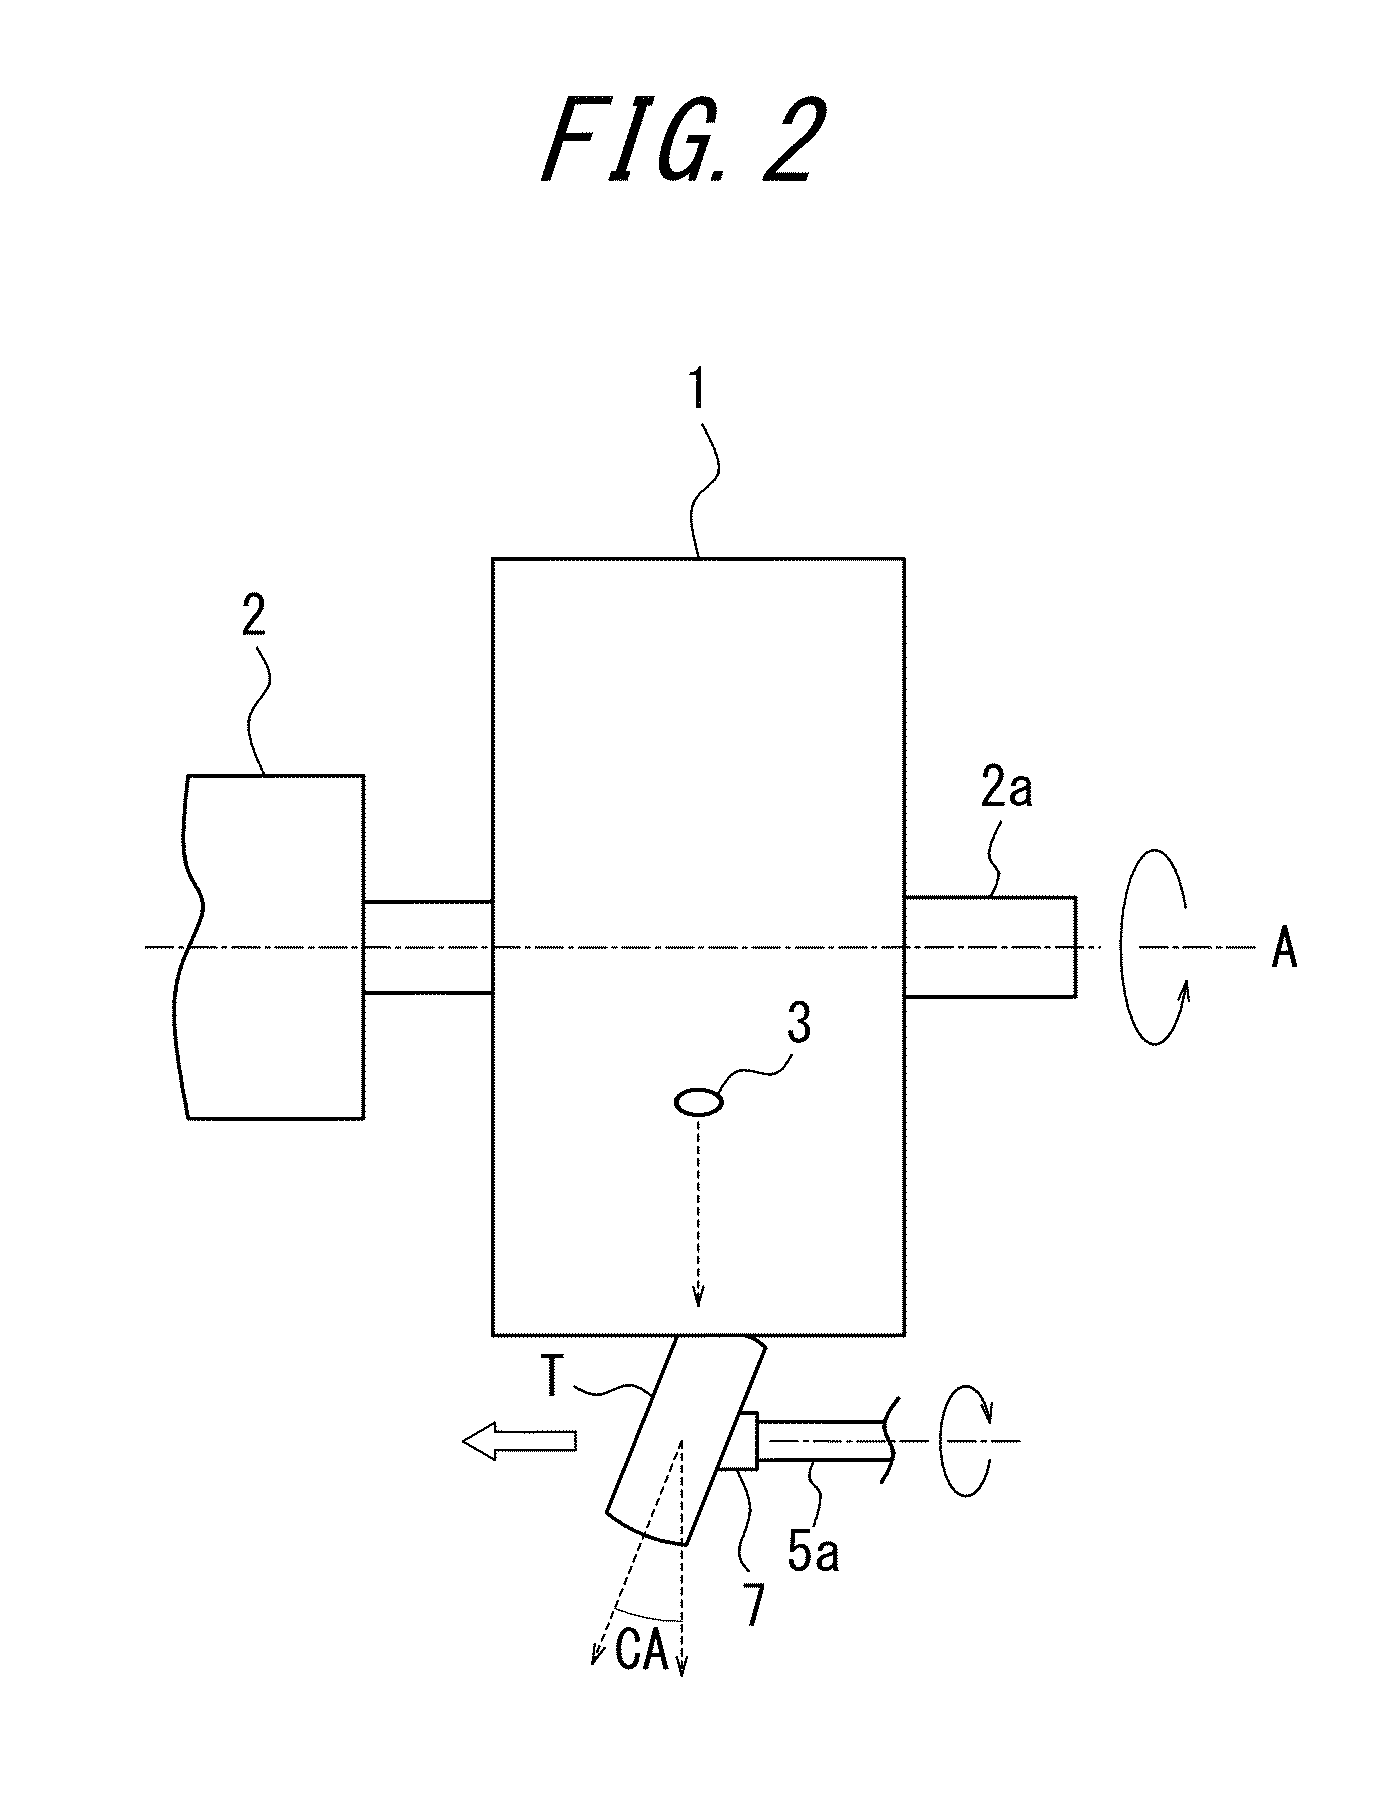 Method and apparatus for measuring tire ground contact properties